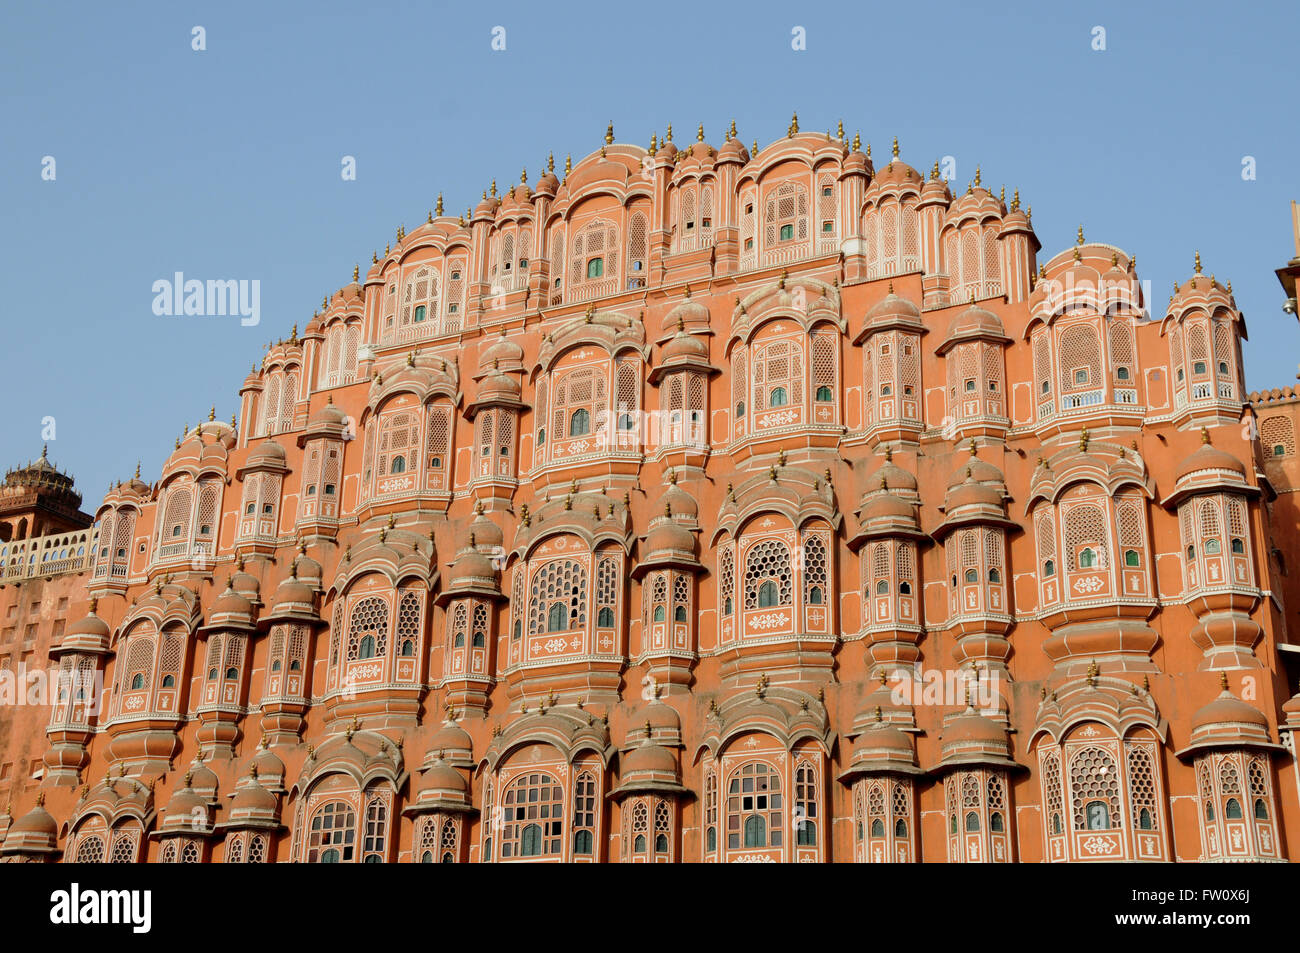 The facade of the Hawa Mahal, the Palace of the Winds, in Jaipur, the capital of the Rajasthan State in Northern India. Stock Photo